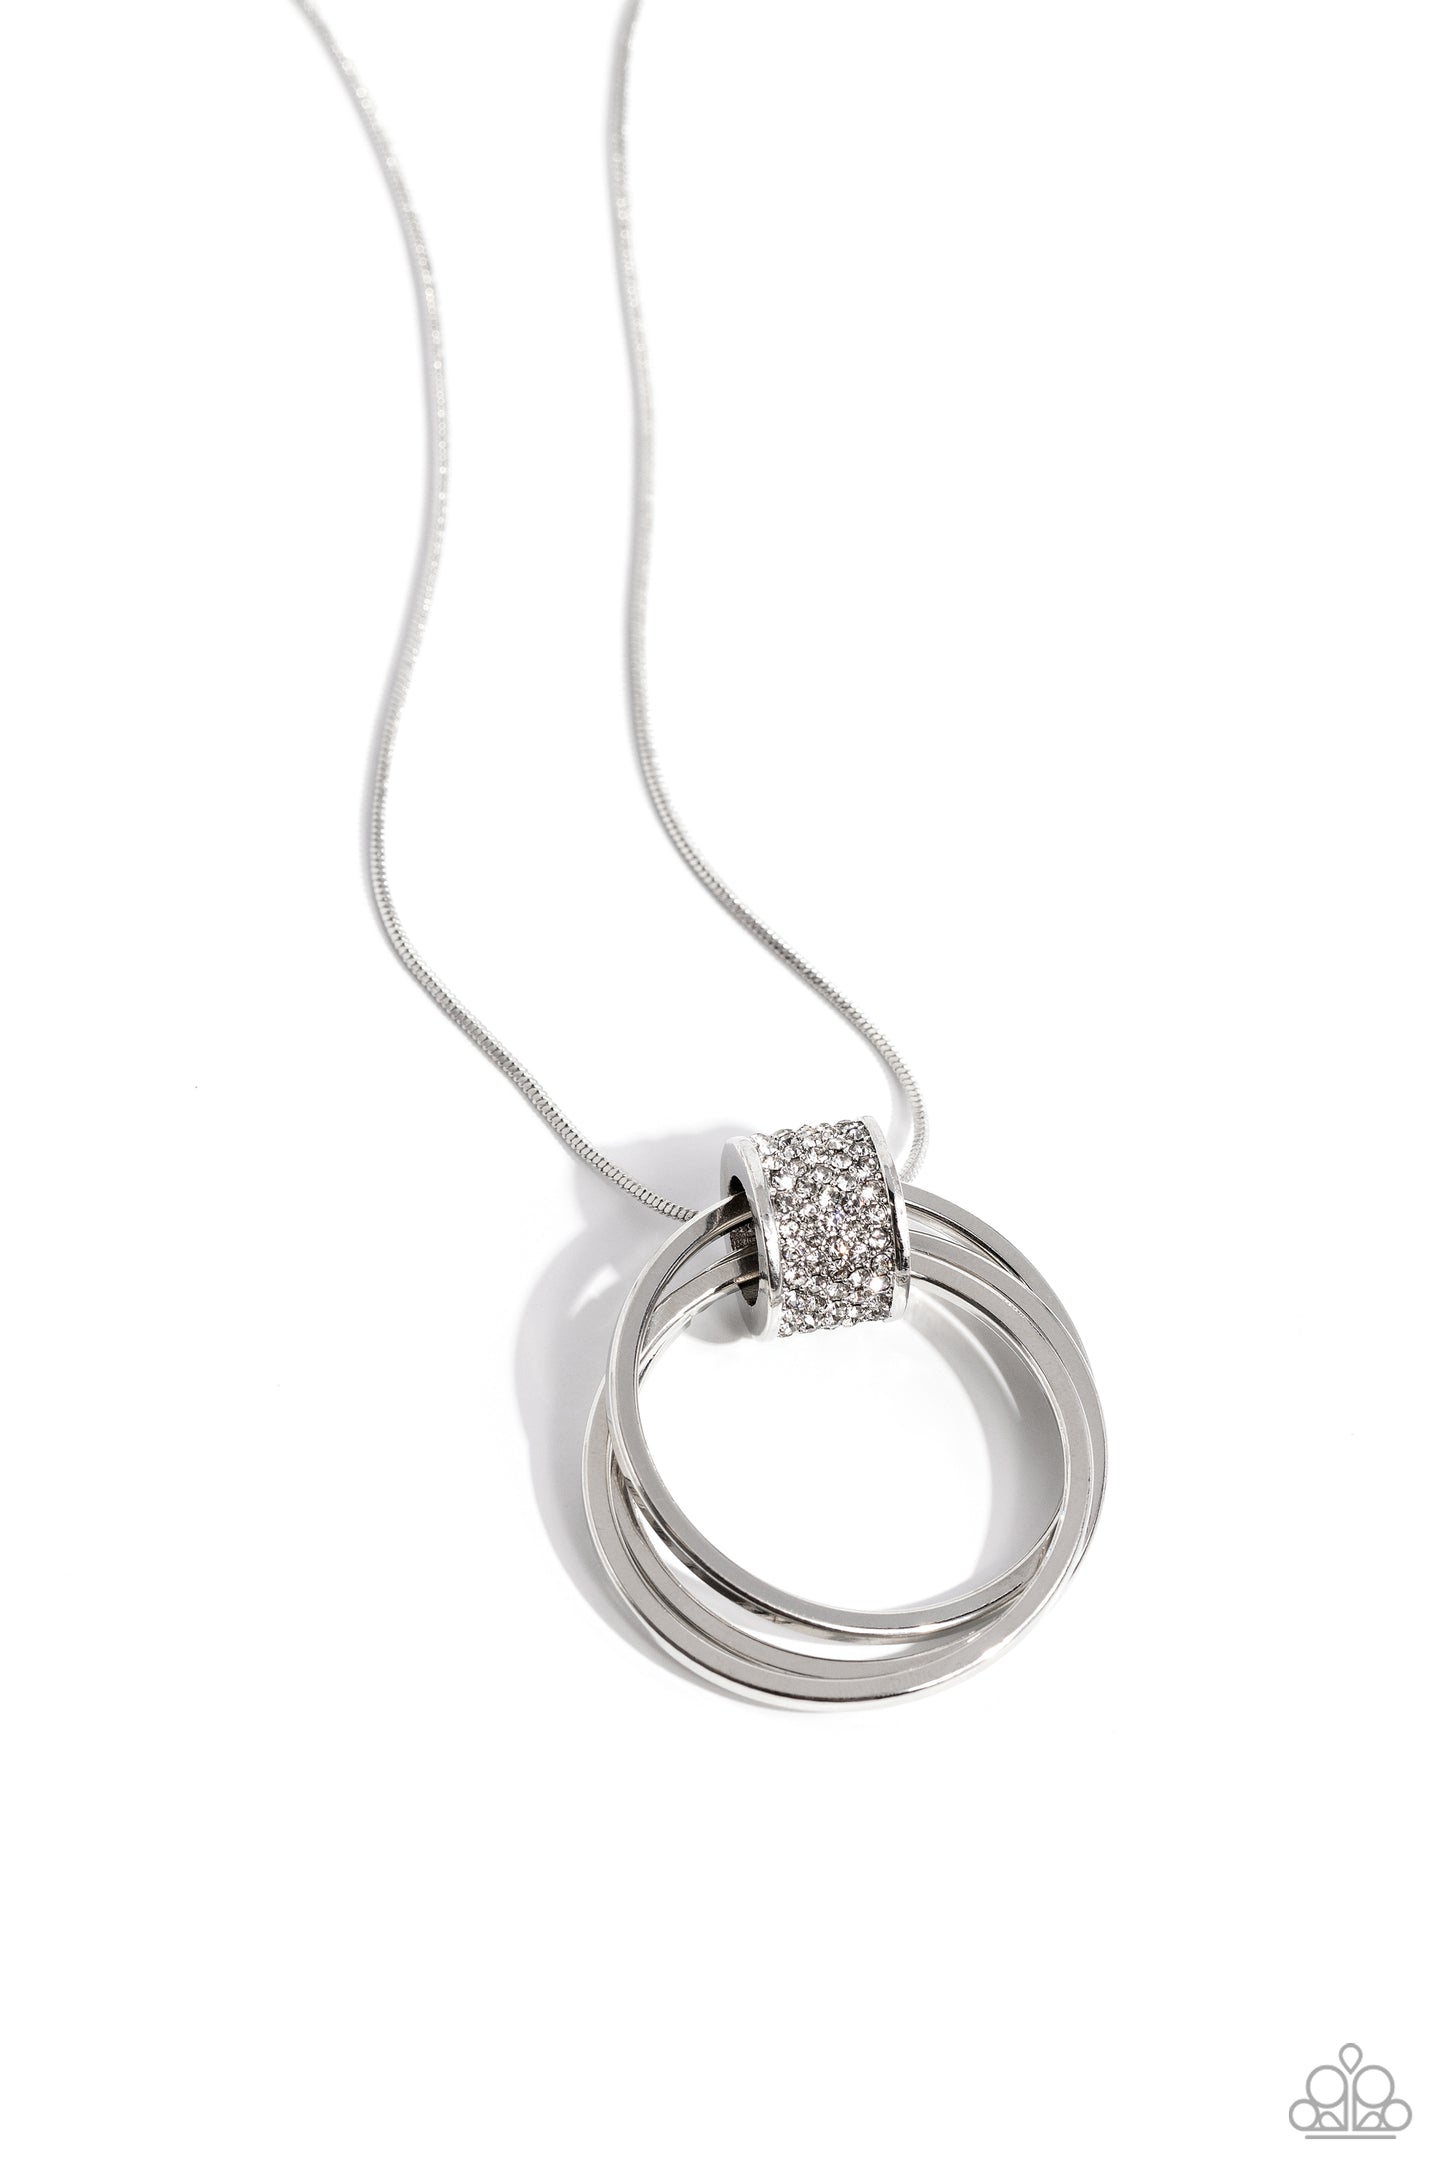 In the Swing of RINGS - white - Paparazzi necklace